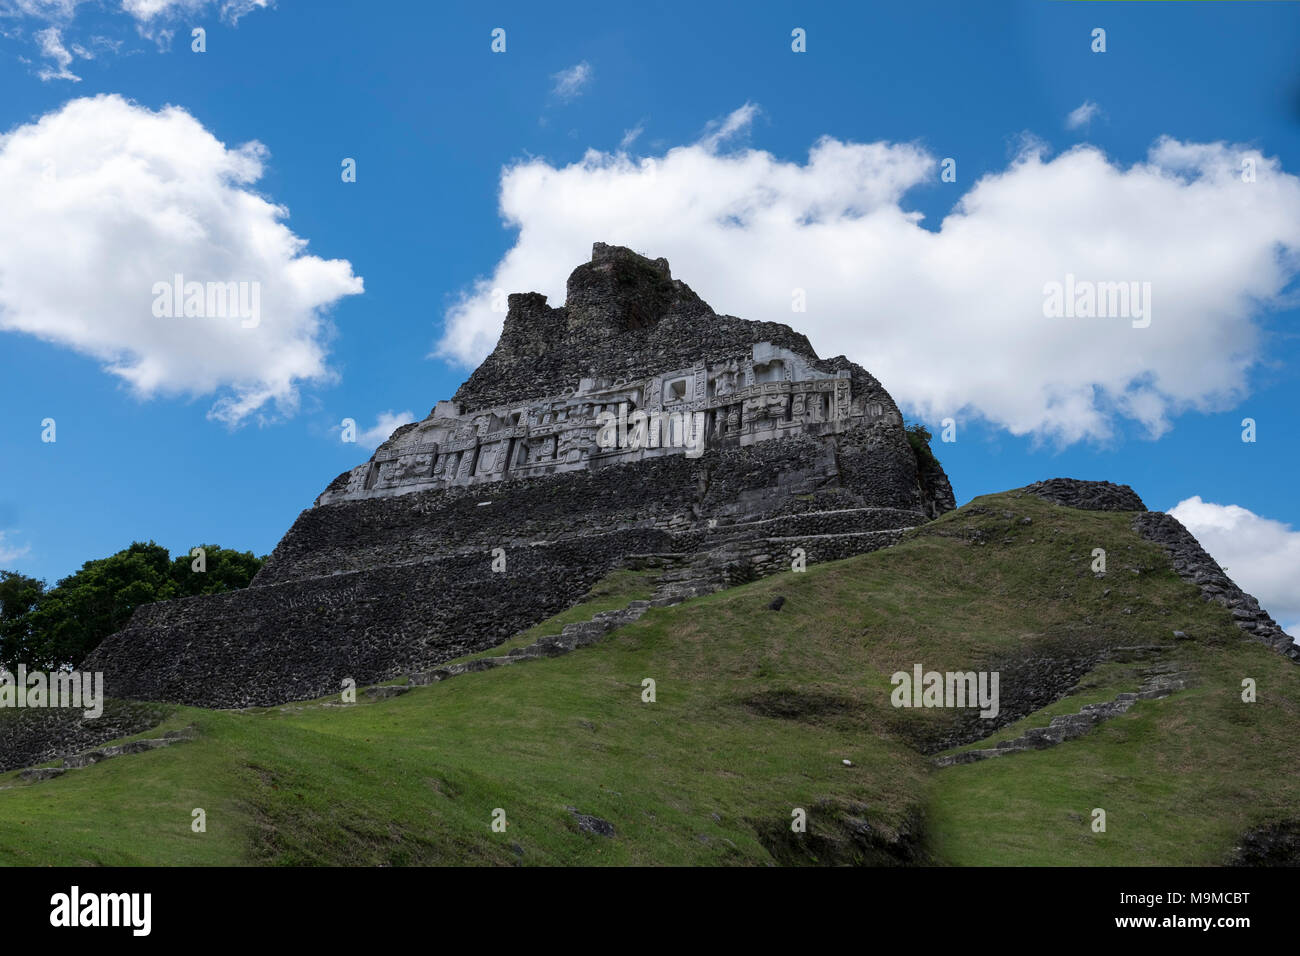 Ancient Mayan temple ruins and structures in Xunantunich, Belize Stock Photo